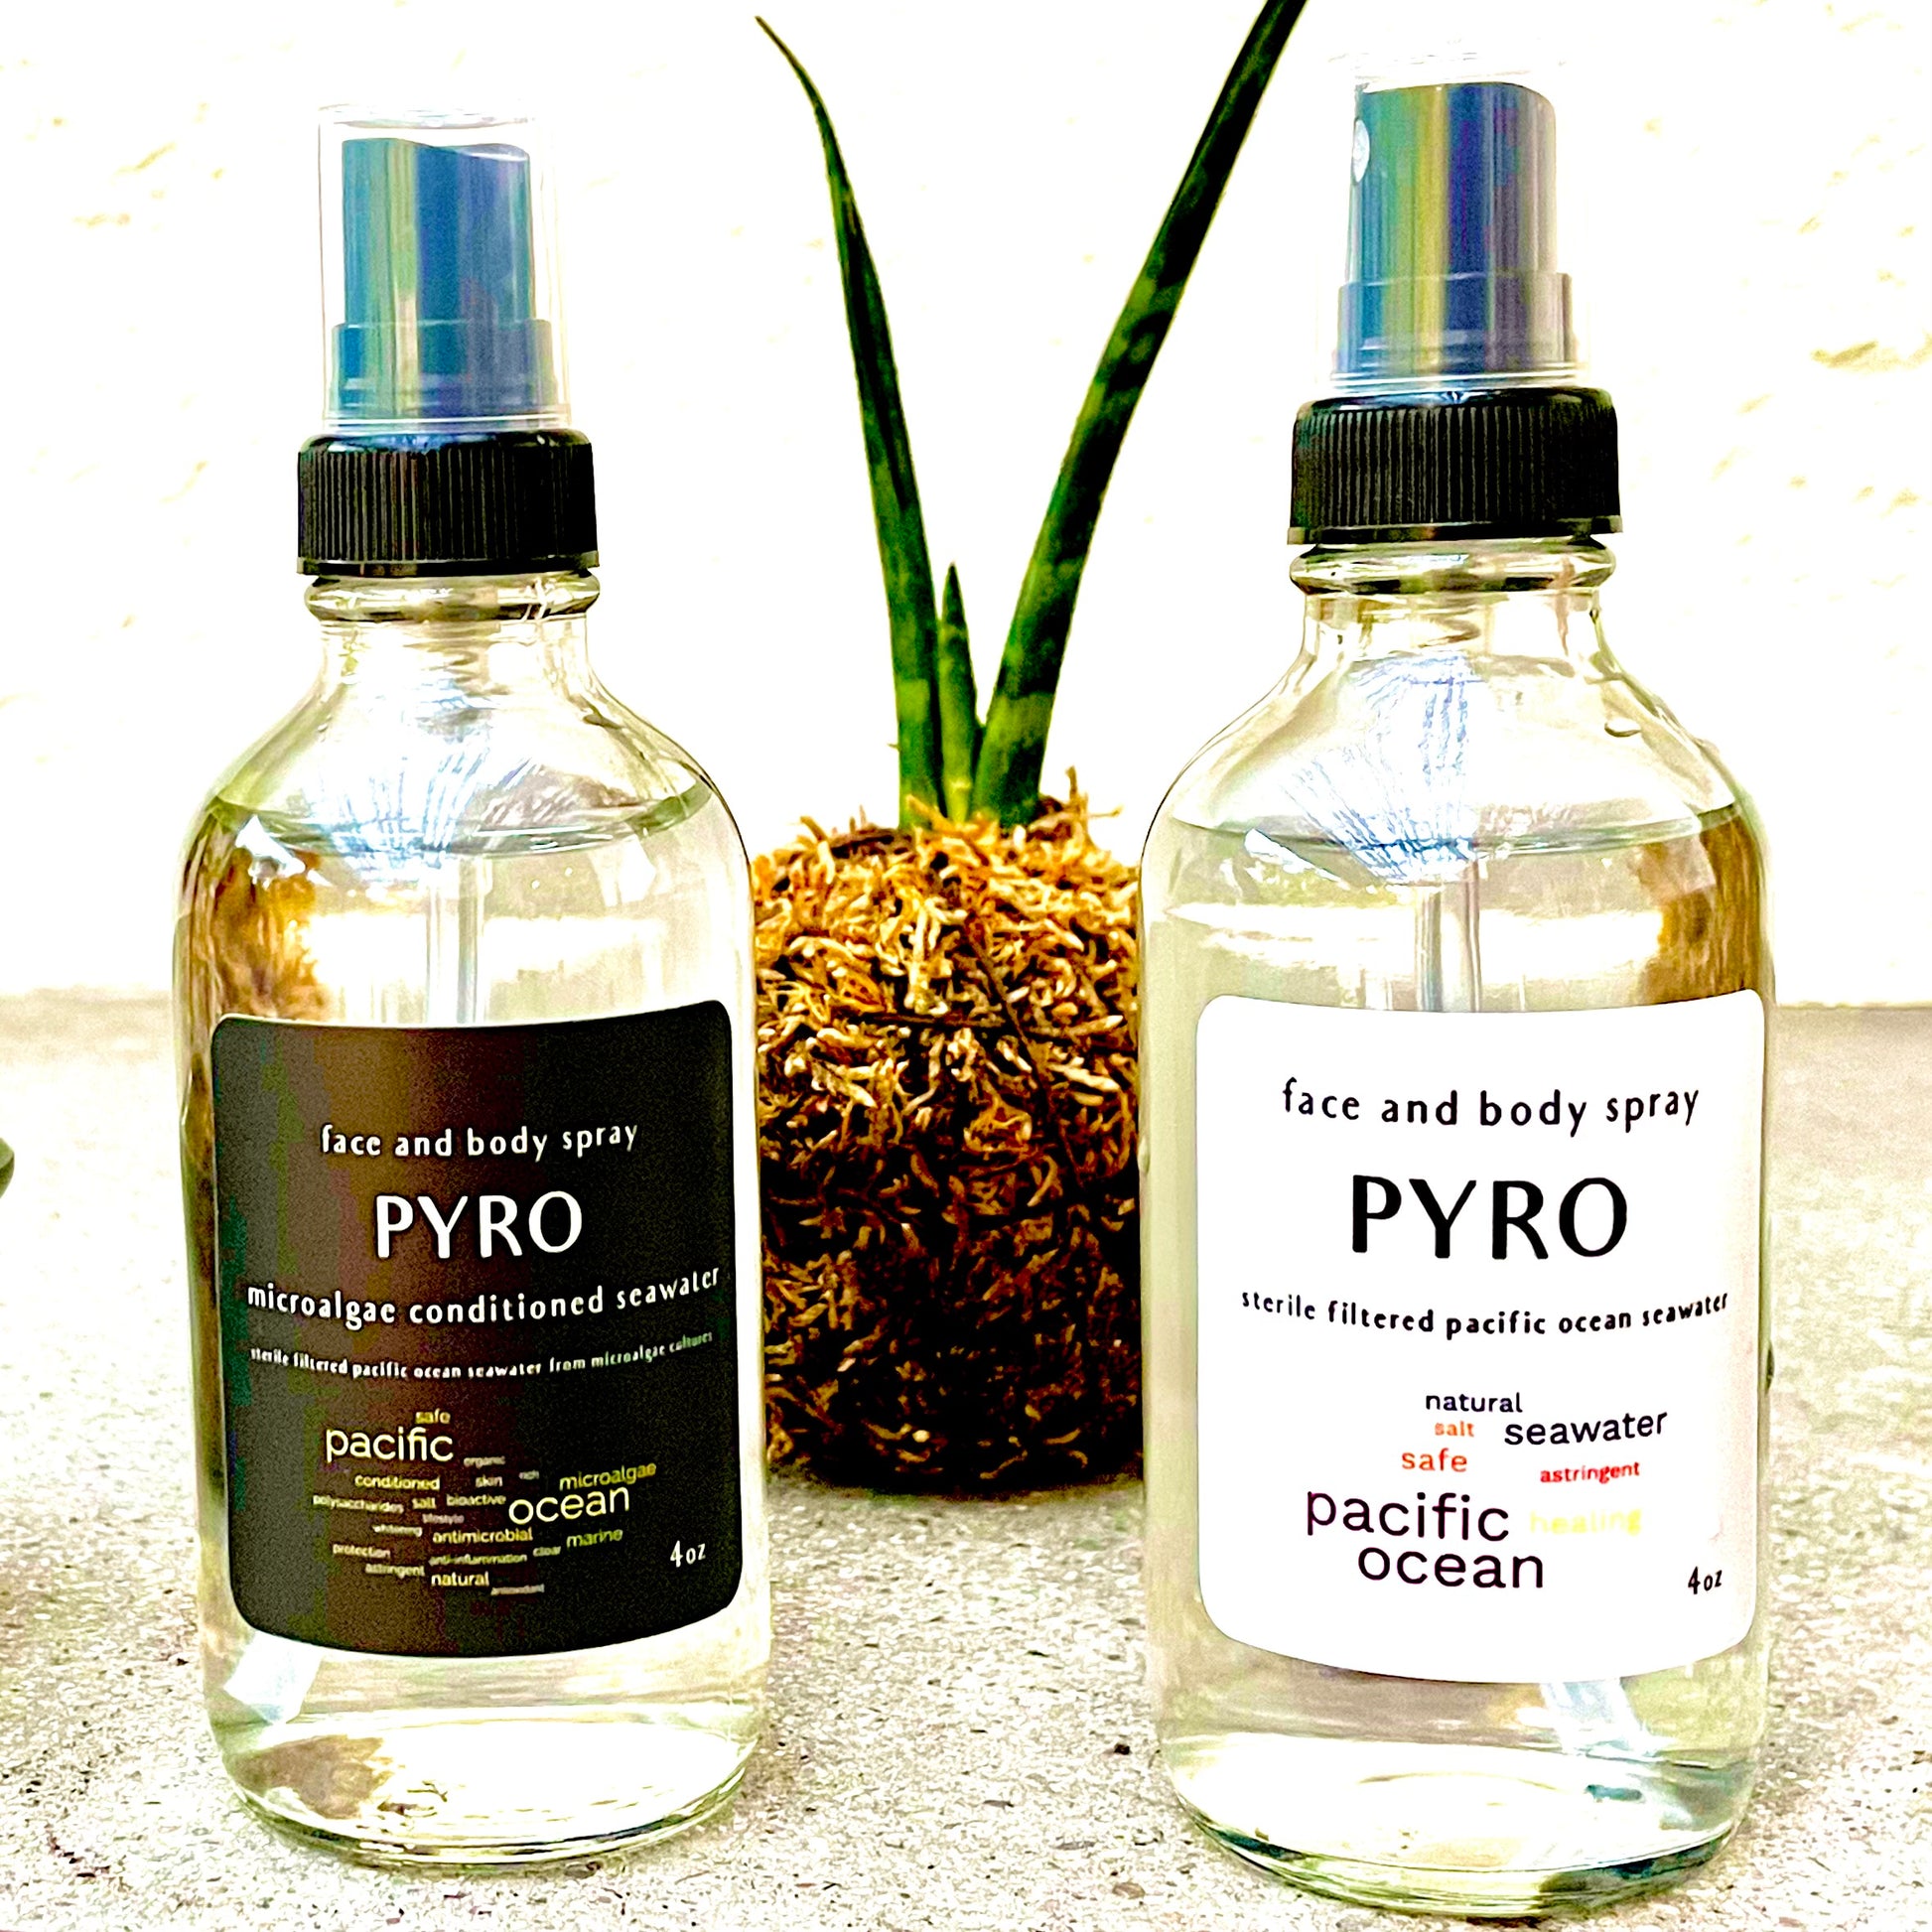 PYRO face and body spray pure seawater and with microalgae treated seawater. Clean safe and easy to use